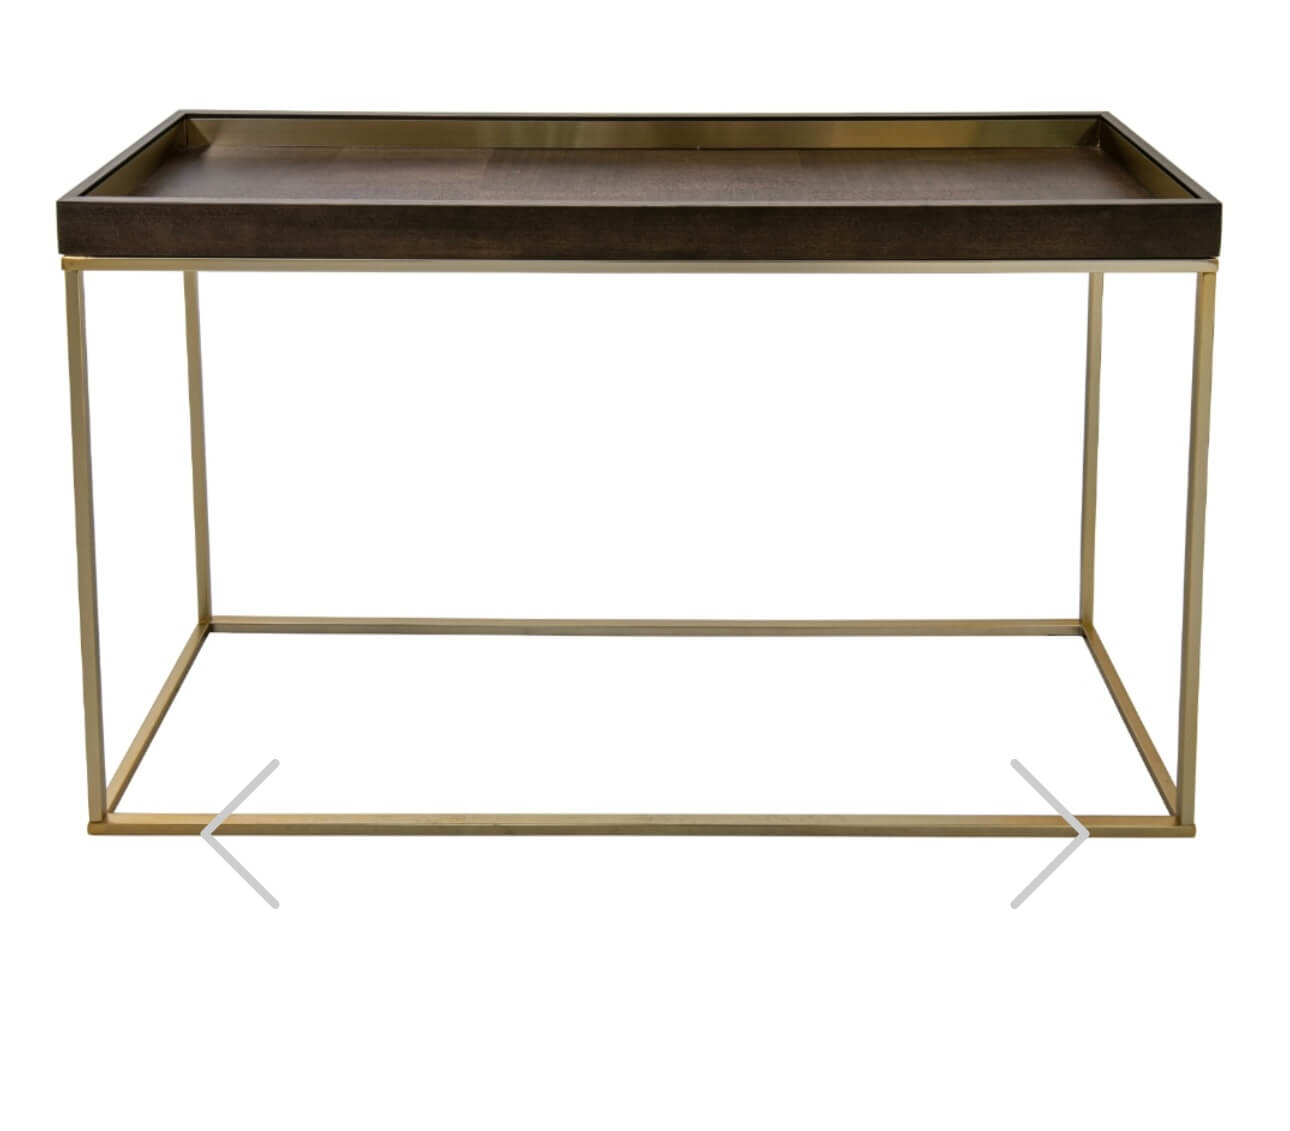 Champagne Chocolate Finish Console Table